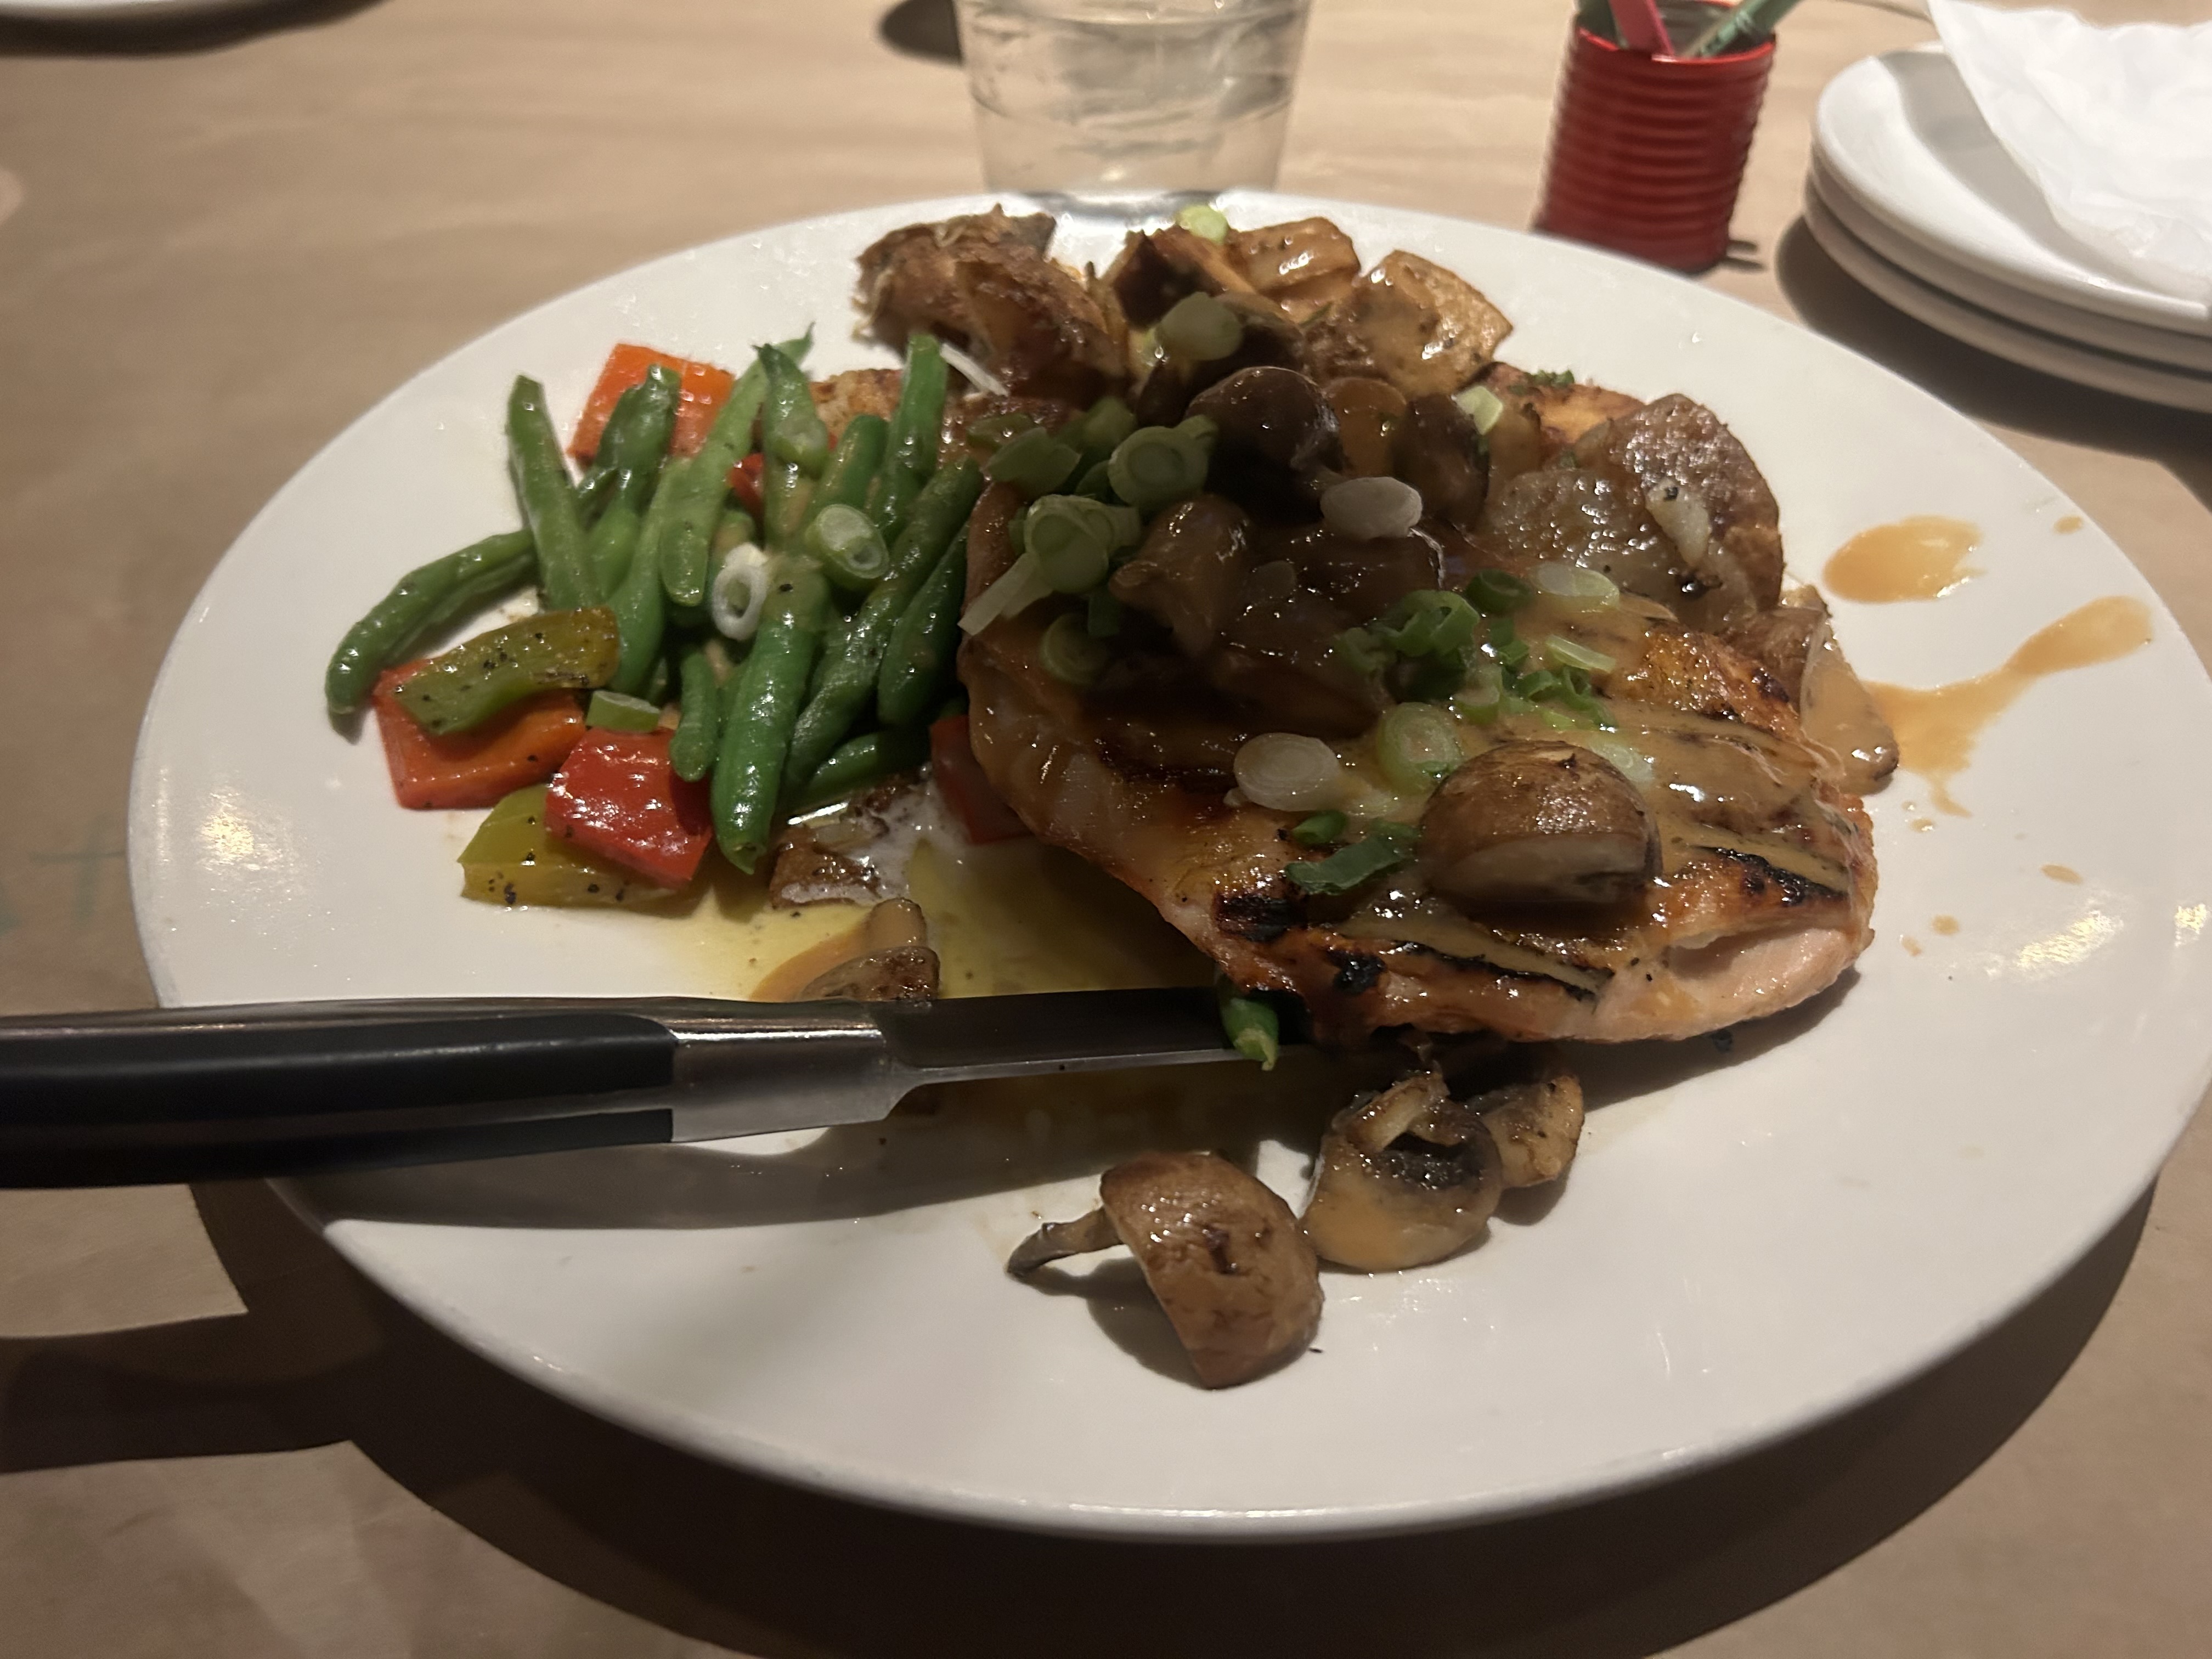 Hunter’s chicken with vegetables